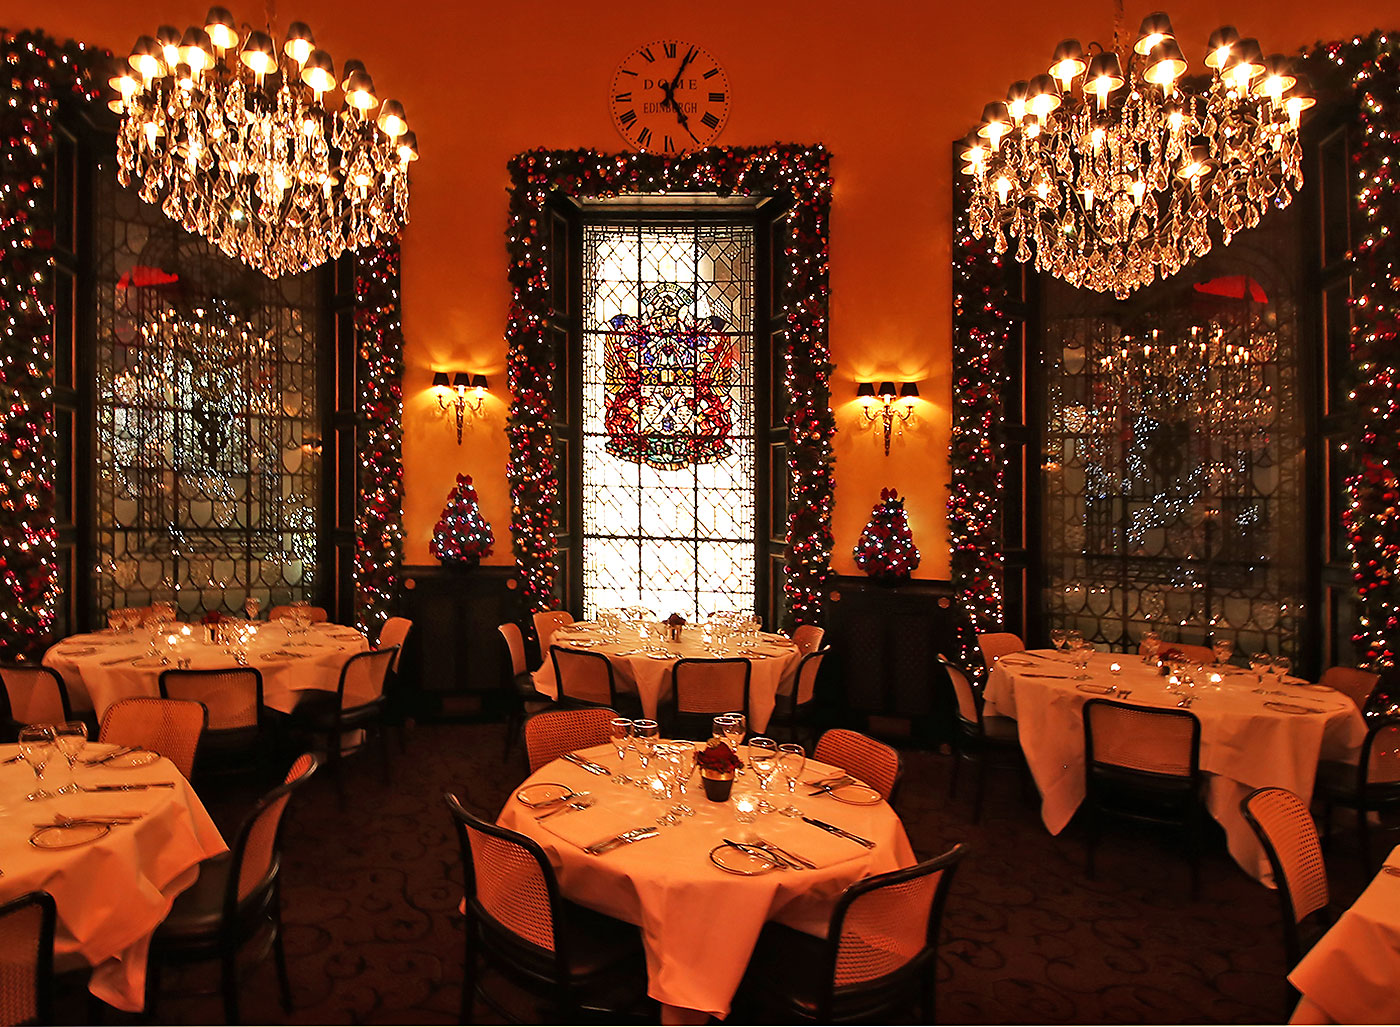 The Dome Restaurant, 14 George Street  -  Chandeliers, Chroistmas decorations and tables set for meals